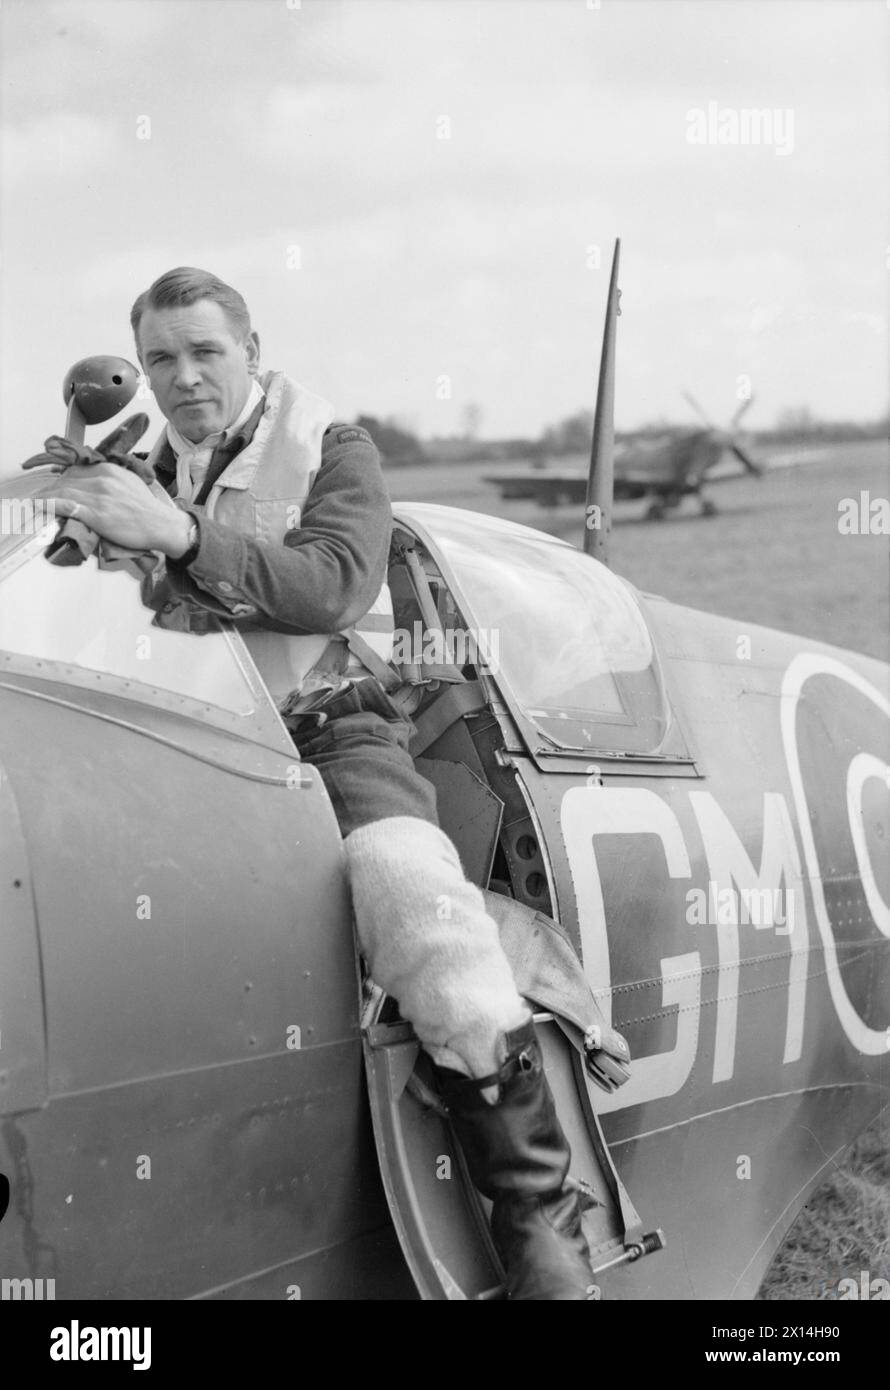 ROYAL AIR FORCE: 2ND TACTICAL AIR FORCE, 1943-1945. - Group Captain A G 'Sailor' Malan, Officer Commanding No. 145 Wing based at Merston, climbing in to the cockpit of his Supermarine Spitfire before taking off from Appledram, Sussex Malan, Adolph Gysbert, Royal Air Force, Wing, 142, Royal Air Force, Maintenance Unit, 201 Stock Photo